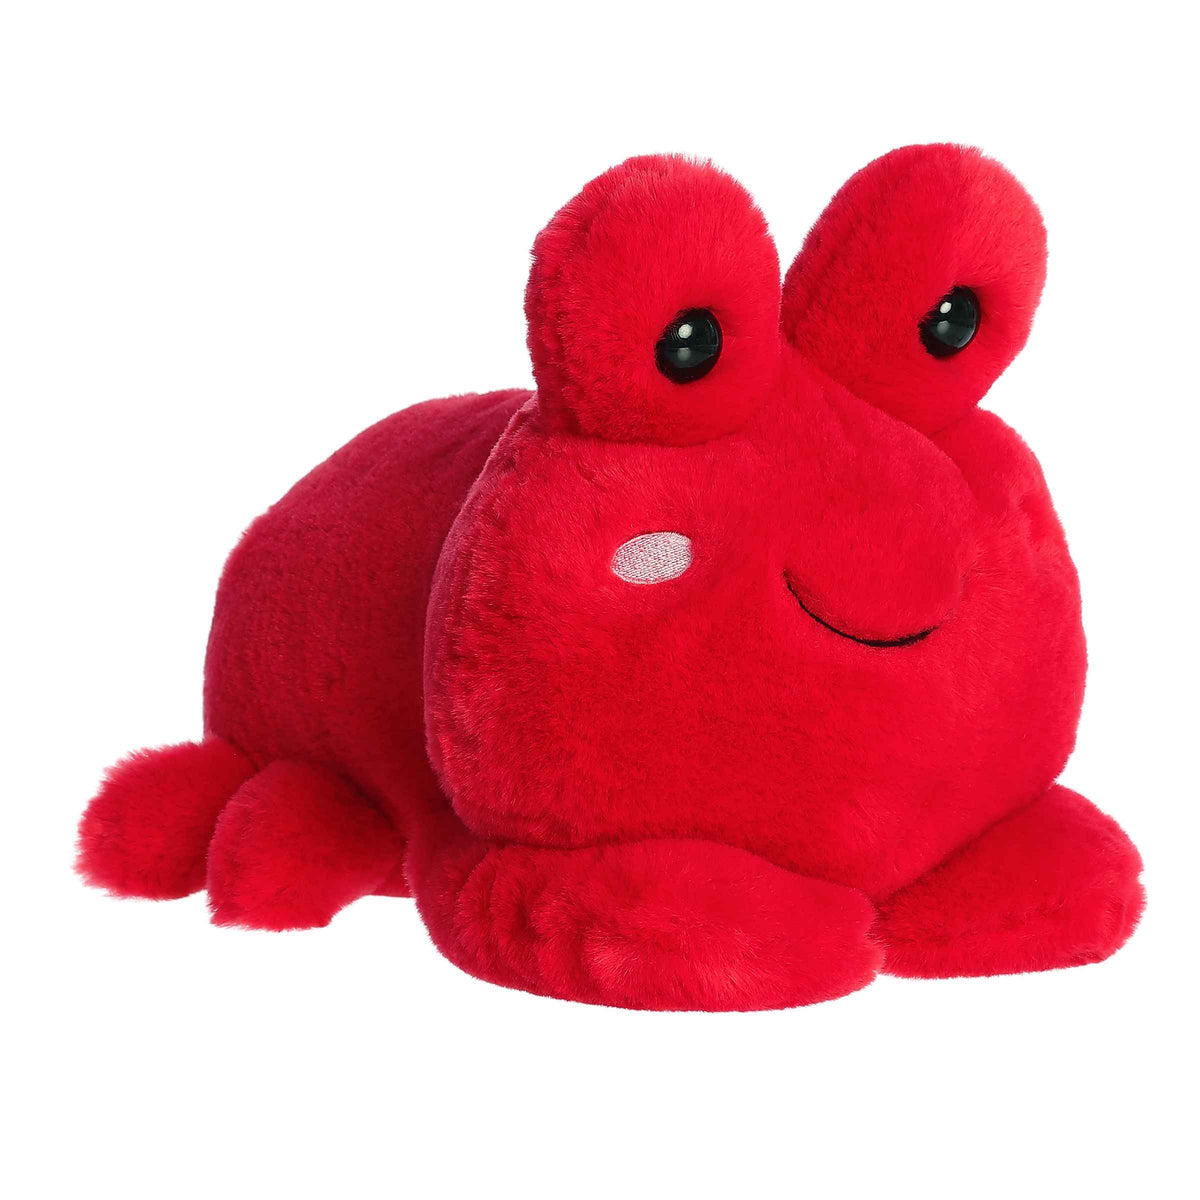 Crista Crab plush from Too Cute Collection, red with plush pincers, designed for comfort